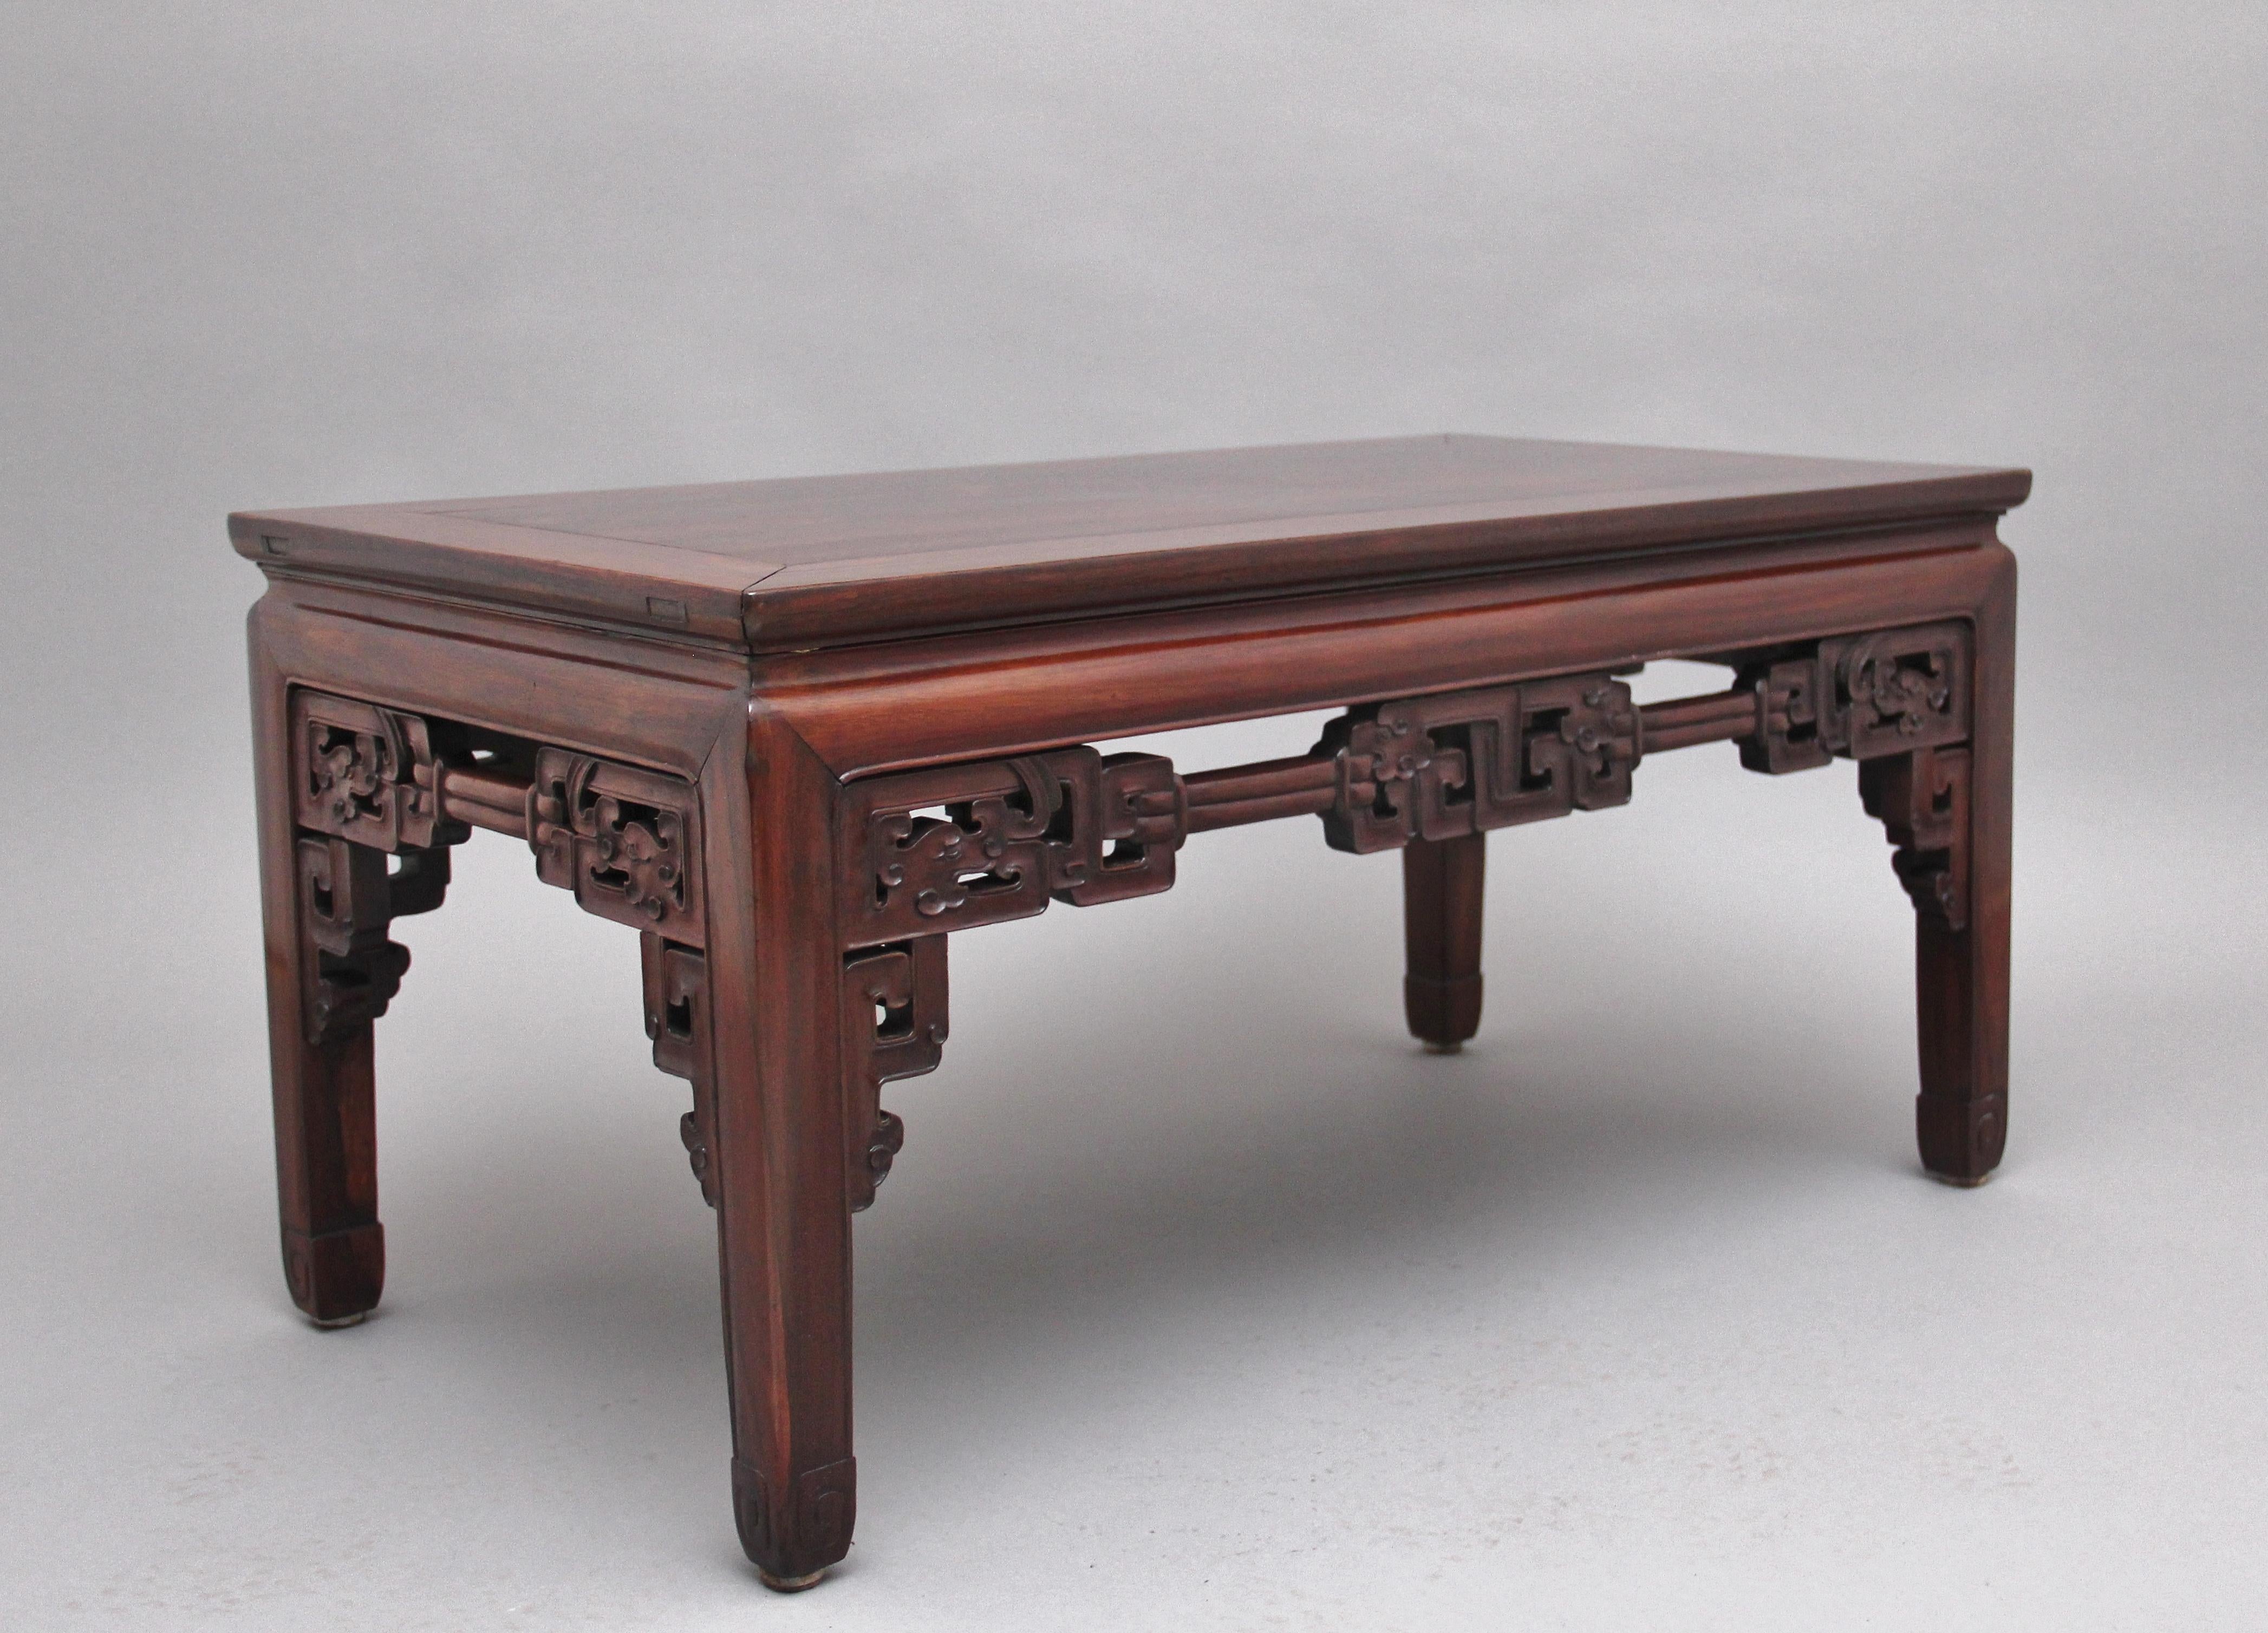 19th century Chinese hardwood coffee table having a nice figured rectangular top supported on square legs ending on carved and scroll feet, all sides decorated with ornate carving in the traditional Chinese style, Circa 1880.